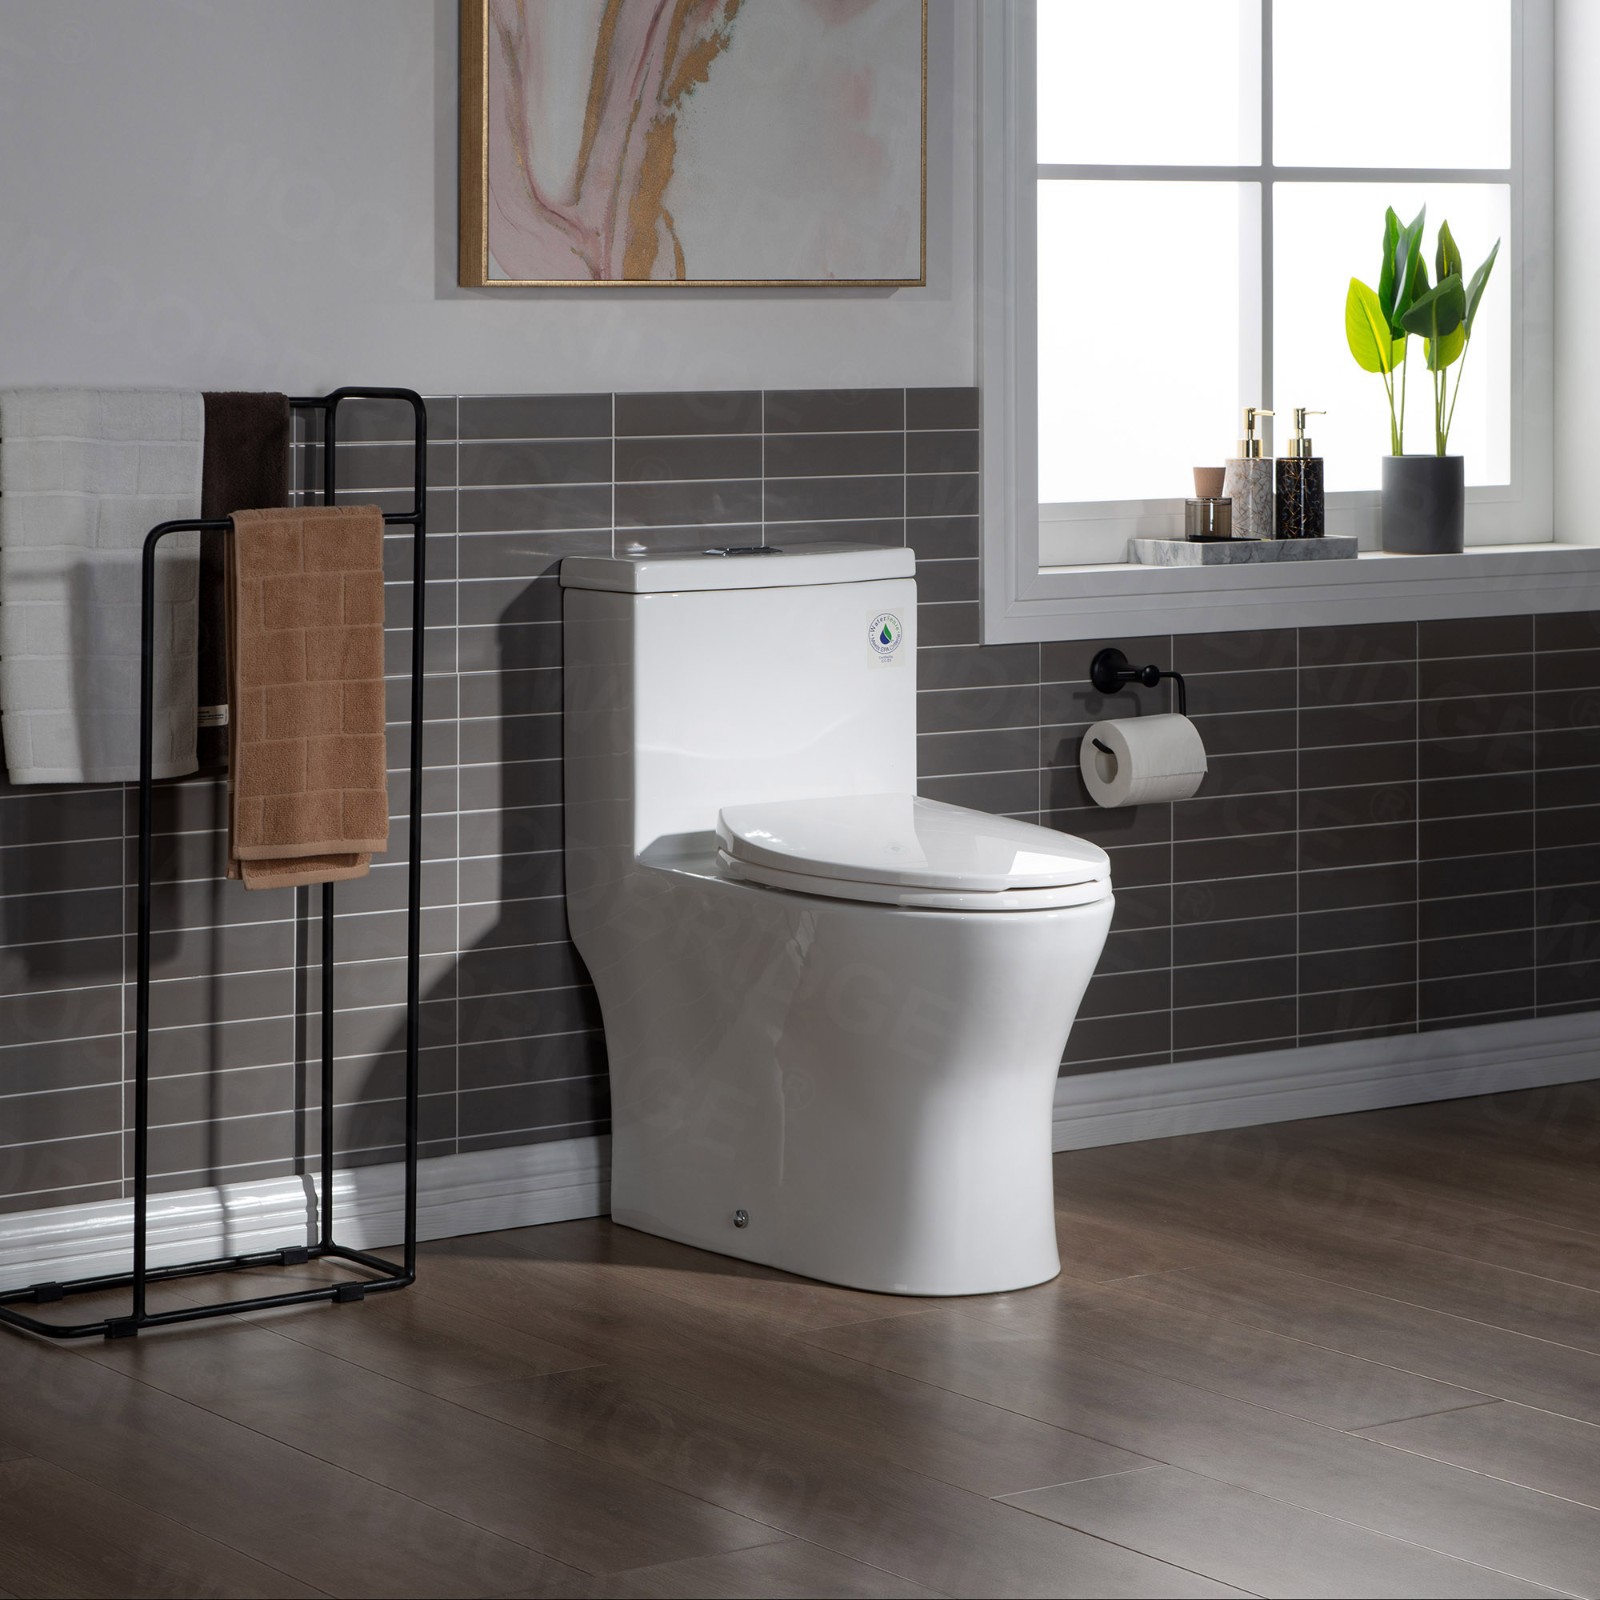  WOODBRIDGE B-0750-A Modern One-Piece Elongated toilet with Solf Closed Seat and Hand Free Touchless Sensor Flush Kit, White_5471